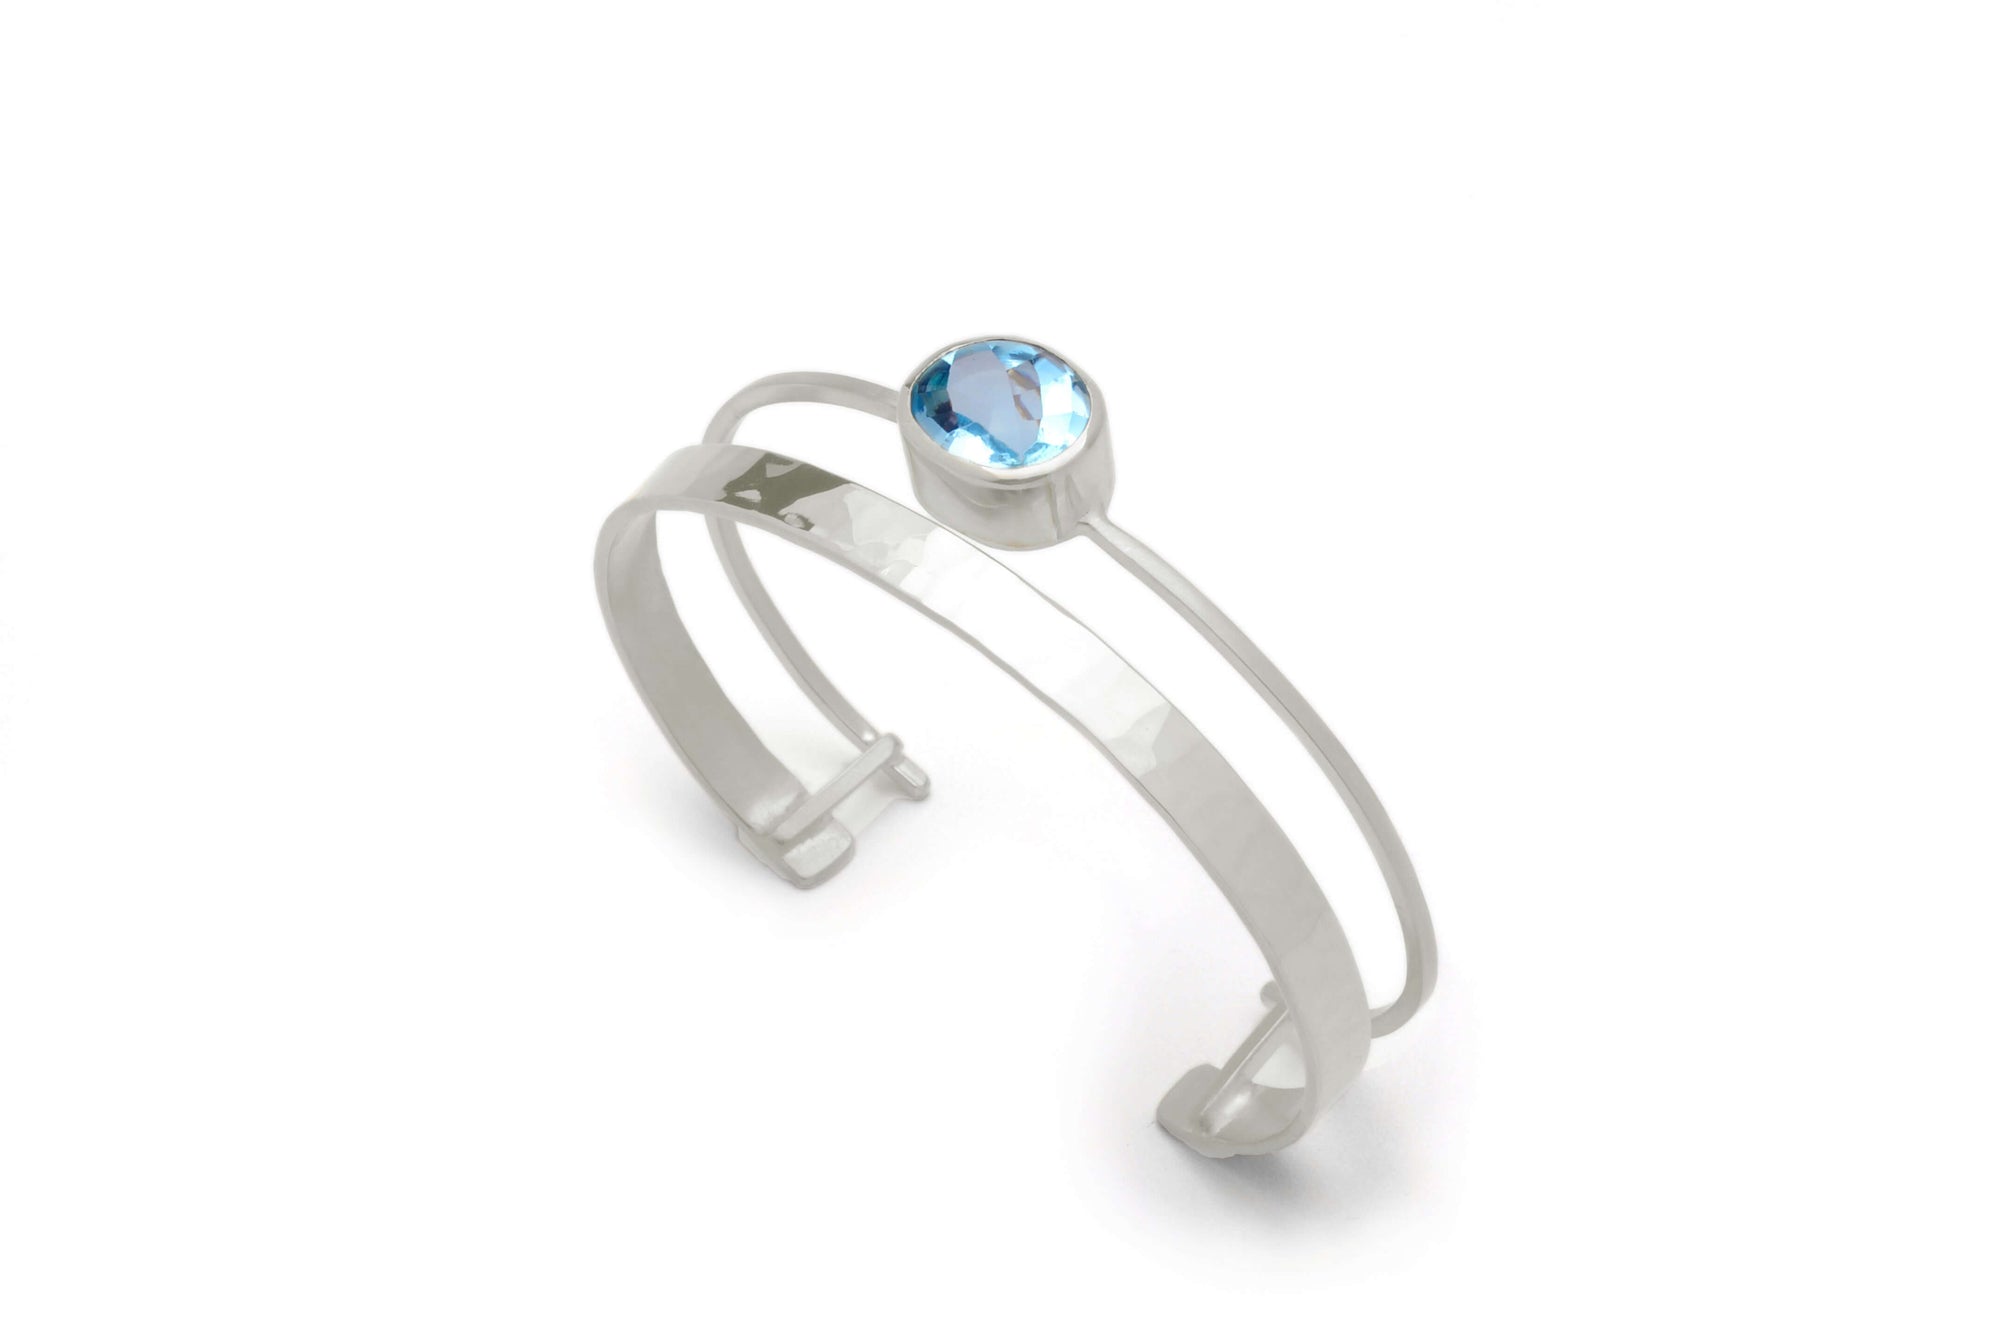 A sterling silver gemstone cuff bracelet is pictured with sky blue topaz